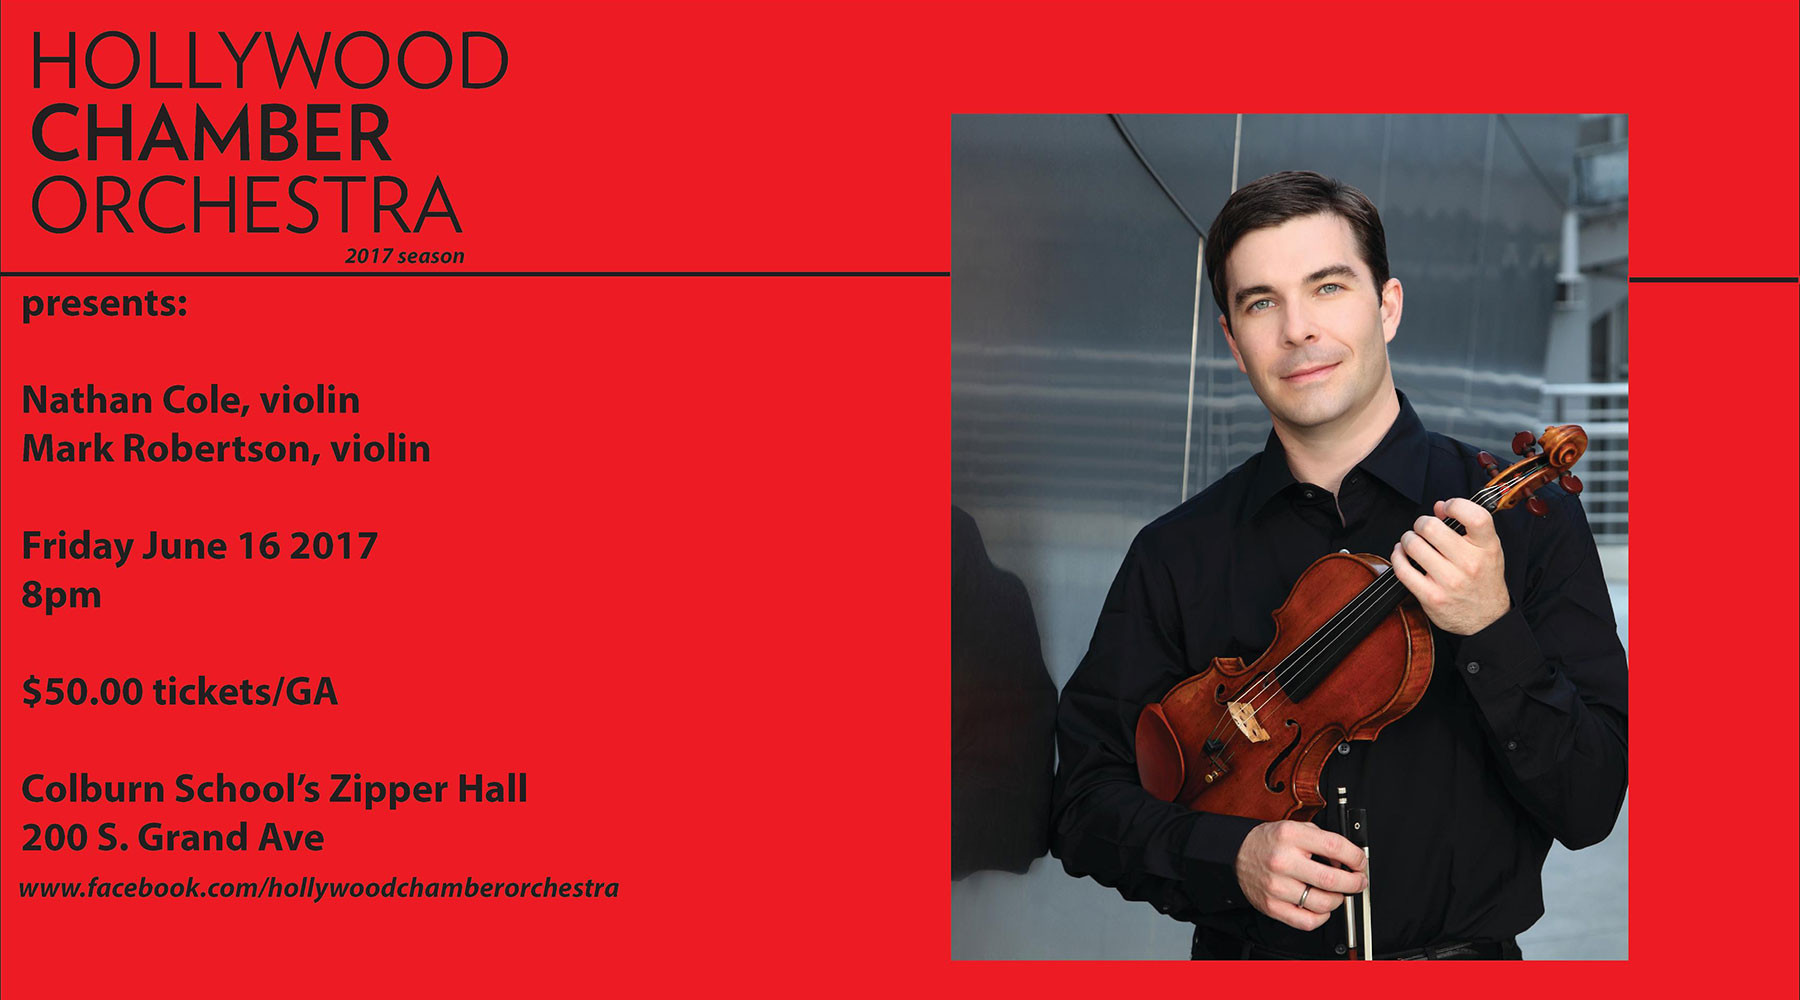 Hollywood Chamber Orchestra with violinist Nathan Cole